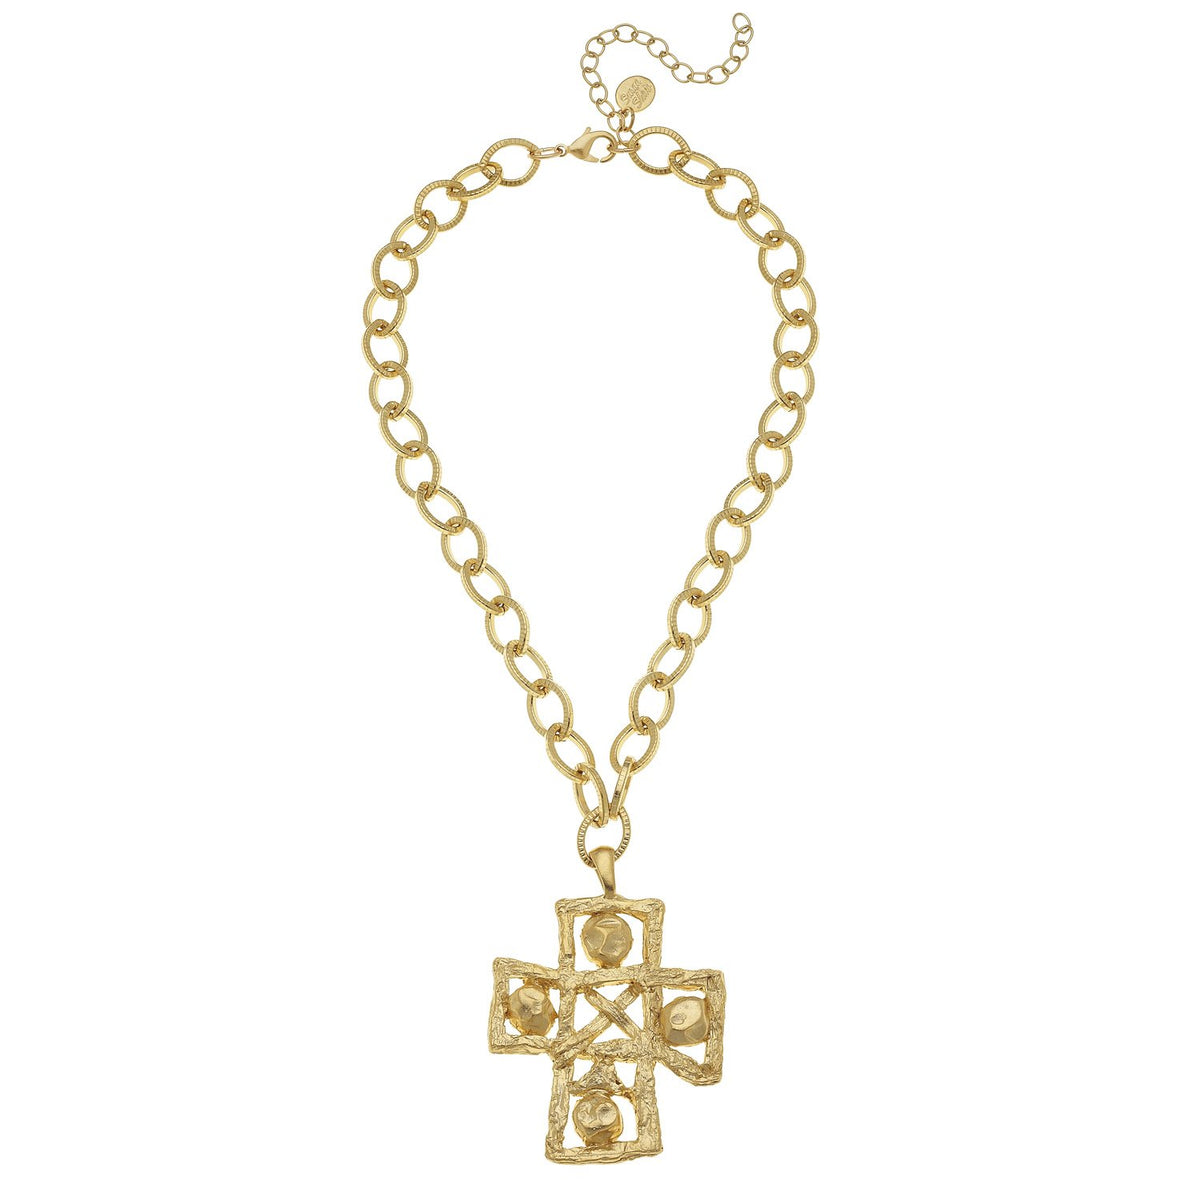 24K Gold Cross Necklace For Men Pendant Solid plated Clasp Women Thin for  Charms Miami Cuban Link Diamond Cut (18.0) | Amazon.com